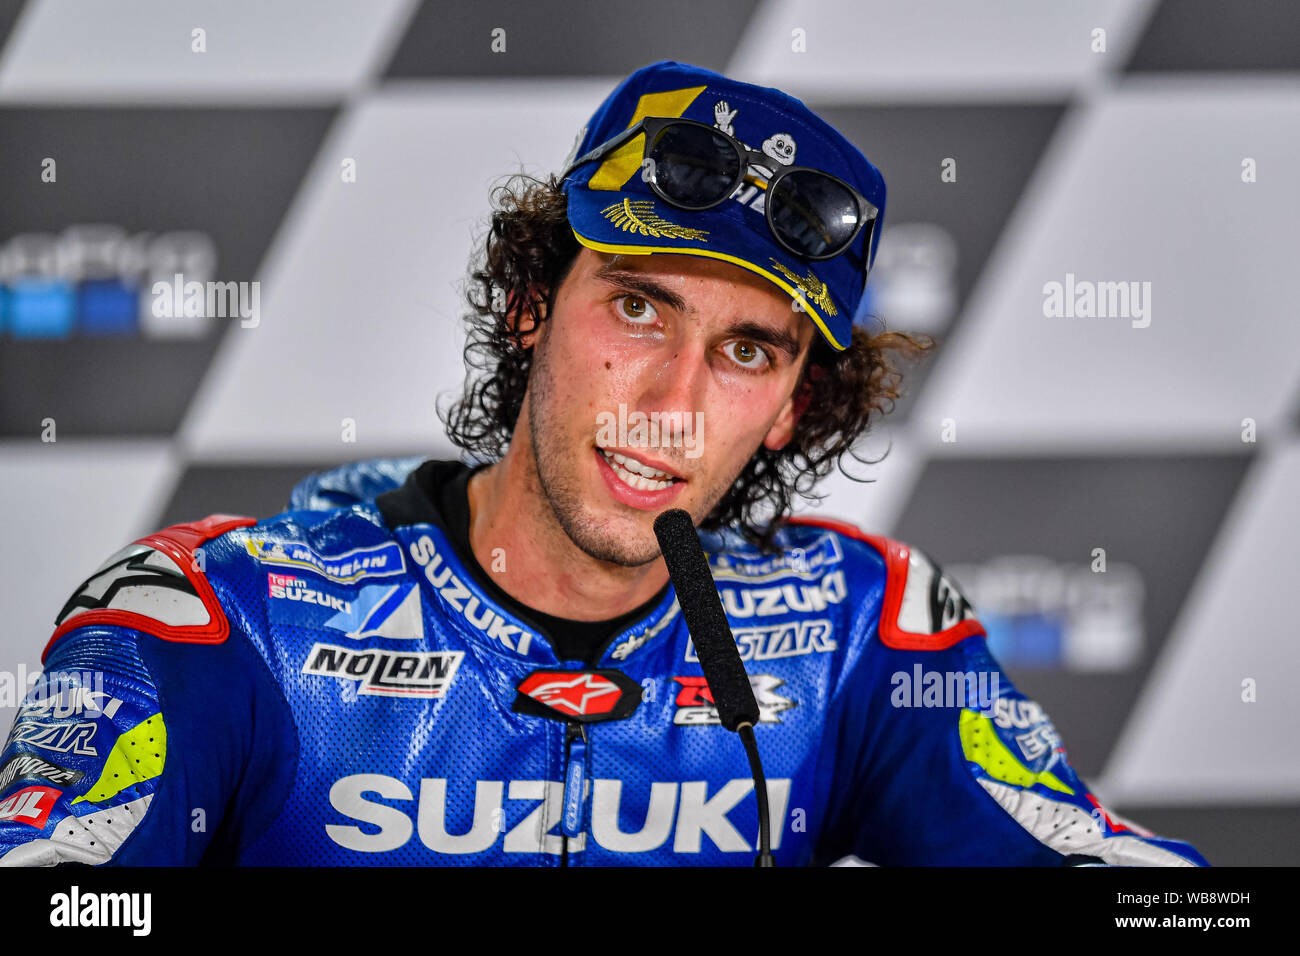 Towcester, UK. 25th Aug, 2019.  25th Aug, 2019. Alex Rins (SPA) of Team SUZUKI ECSTAR at Press Conference after Sunday’s Race of  GoPro British Grand Prix at Silverstone Circuit on Sunday, August 25, 2019 in TOWCESTER, ENGLAND. Credit: Taka G Wu/Alamy Live News Stock Photo